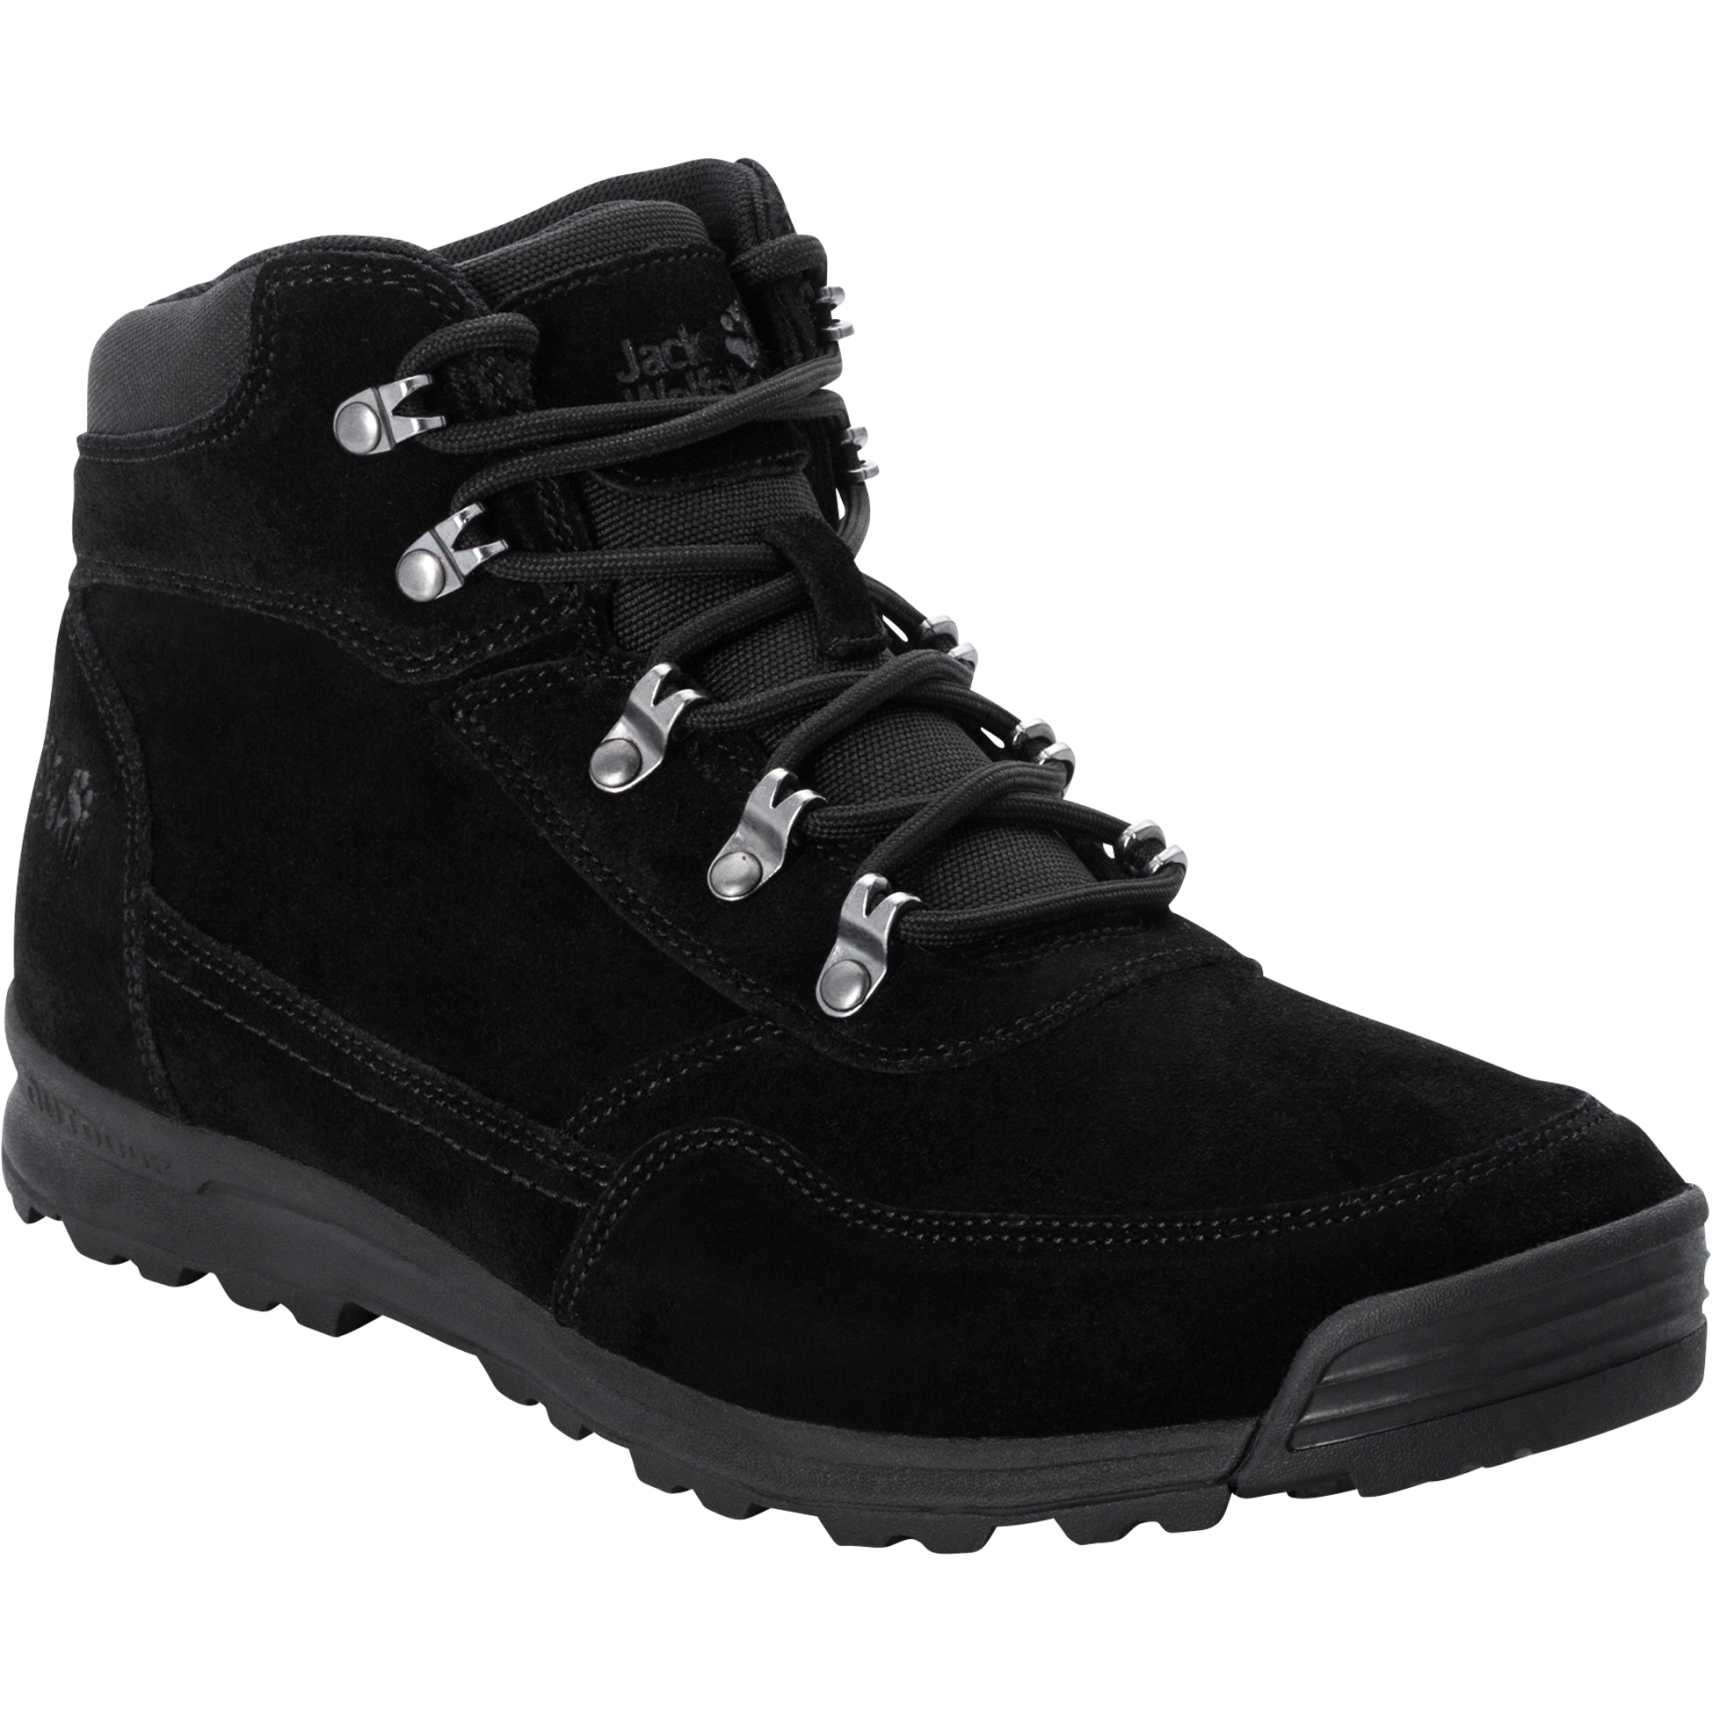 Picture of Jack Wolfskin Hikestar Mid Leather Boots - black / black